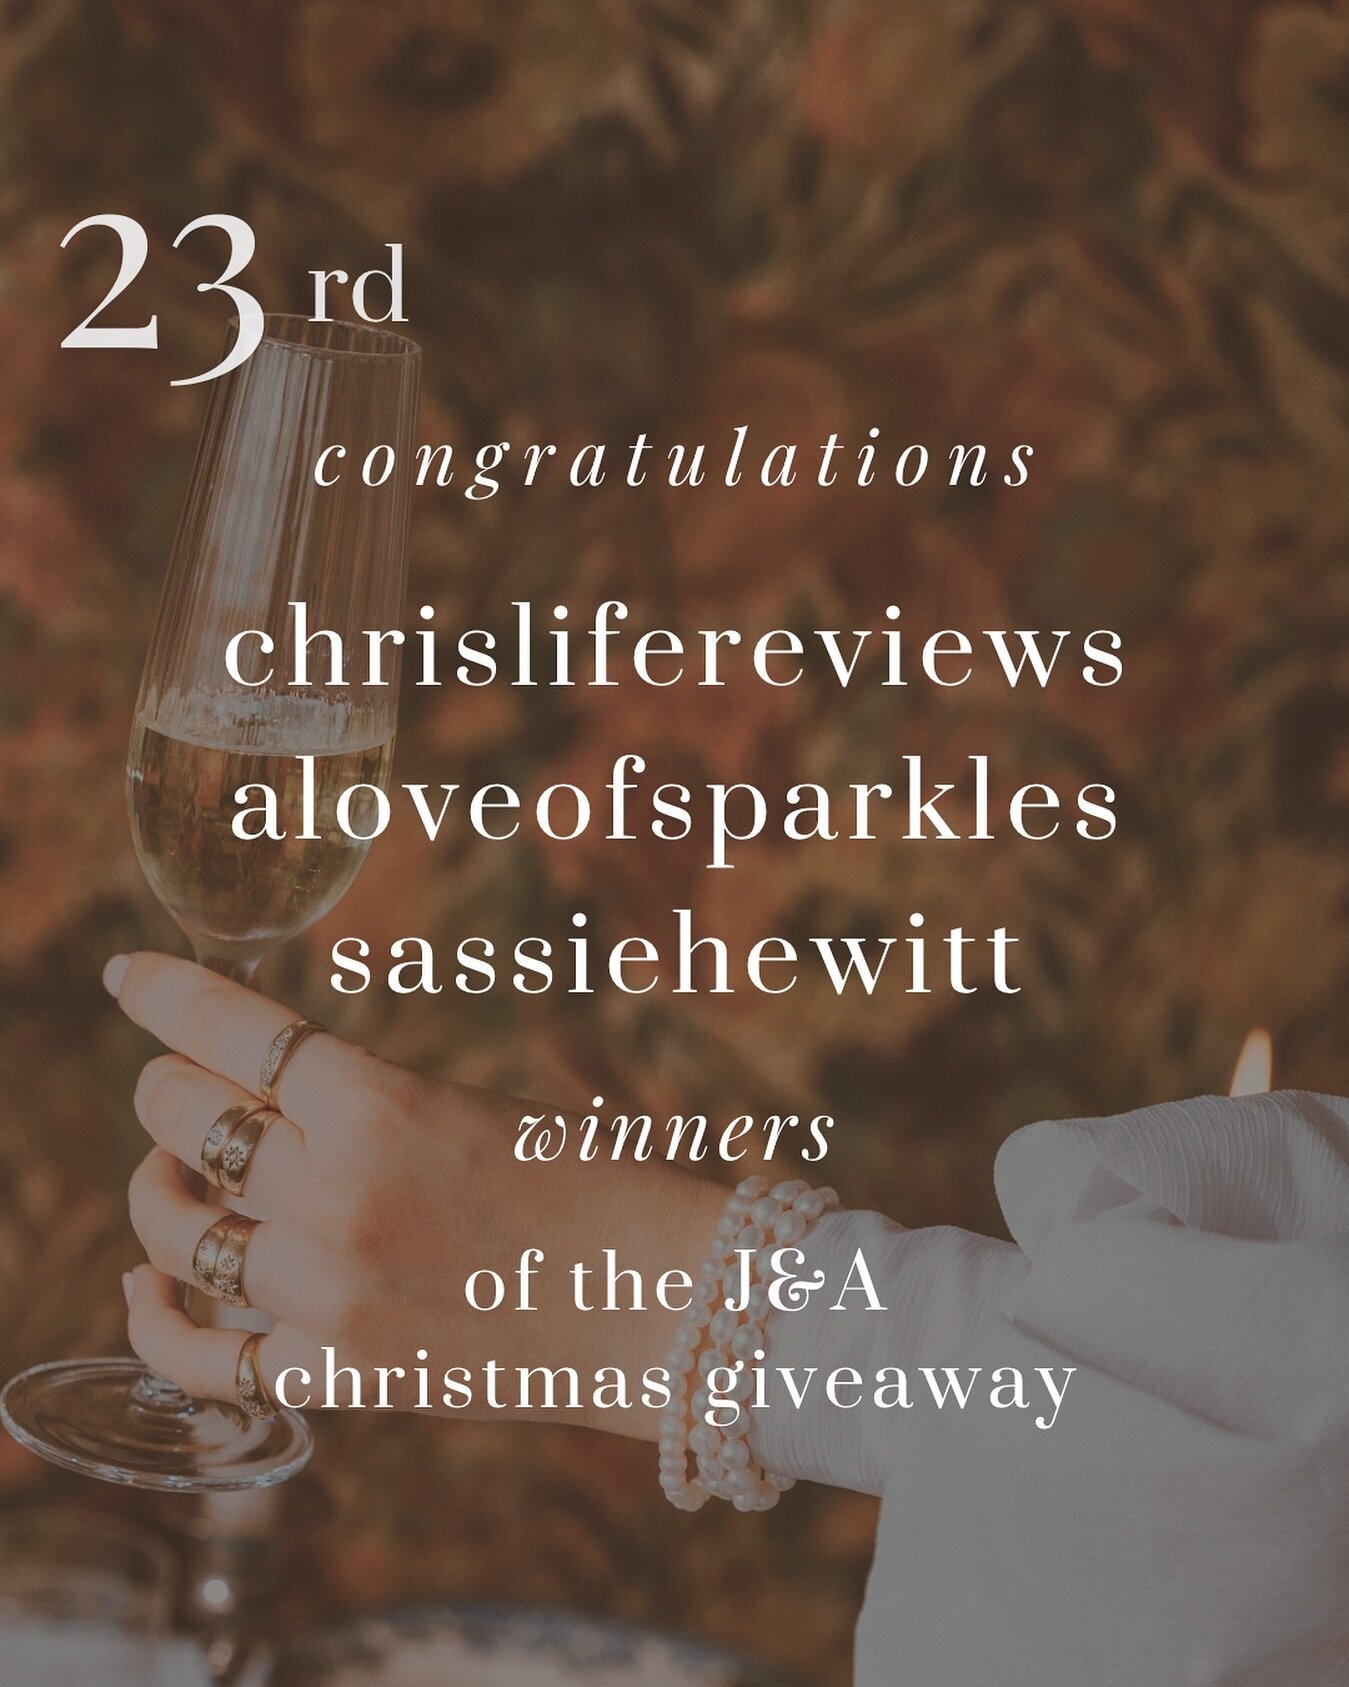 Congratulations to&nbsp;the winners of our Christmas Giveaway 💛✨

1st Place: @chrislifereviews
2nd Place: @aloveofsparkles 
3rd Place: @sassiehewitt 

You&rsquo;ve each won a J&amp;A Gift Card! We&rsquo;ll be in touch 💌 
Thank you so much to everyo